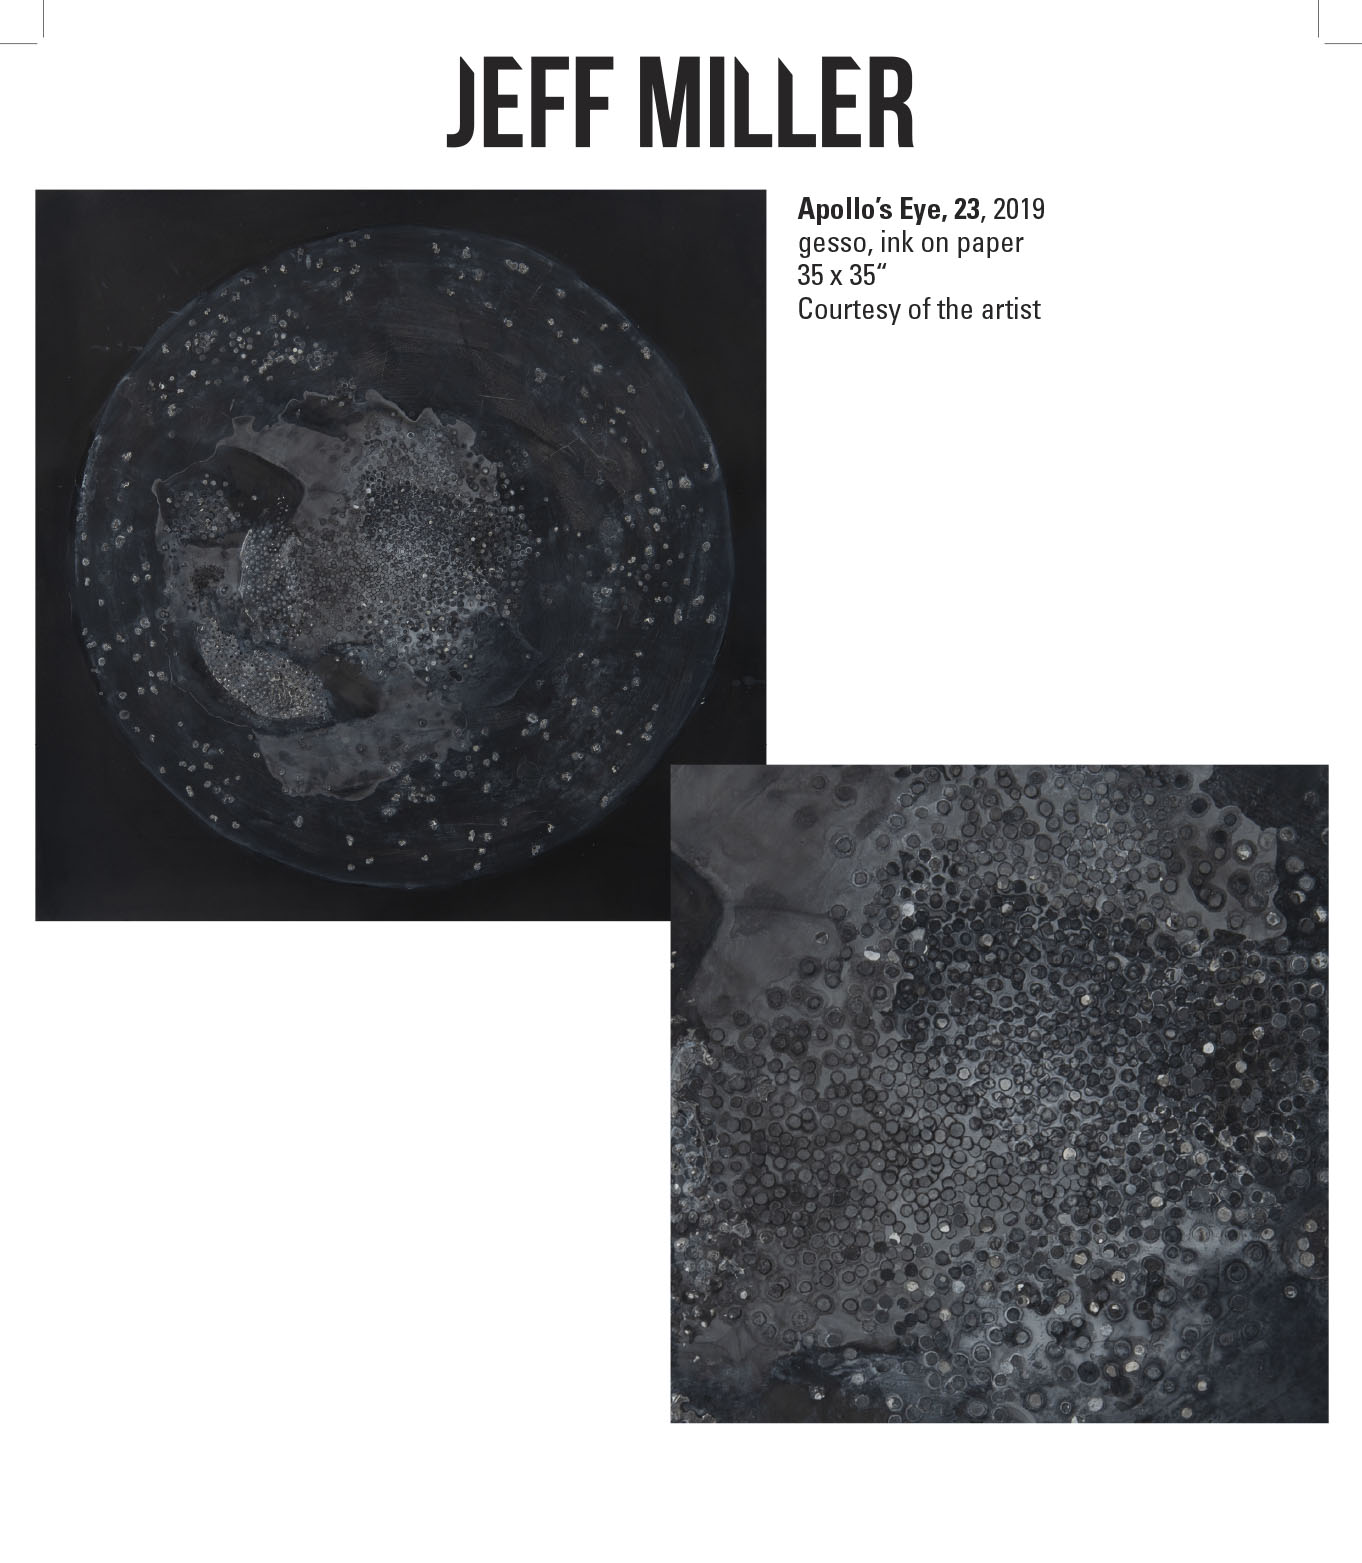 Jeff Miller, Apollo’s Eye, 23, 2019. Gesso, ink on paper. 35 x 35“ Courtesy of the artist. A circular dark shape with small round circles that create a texture